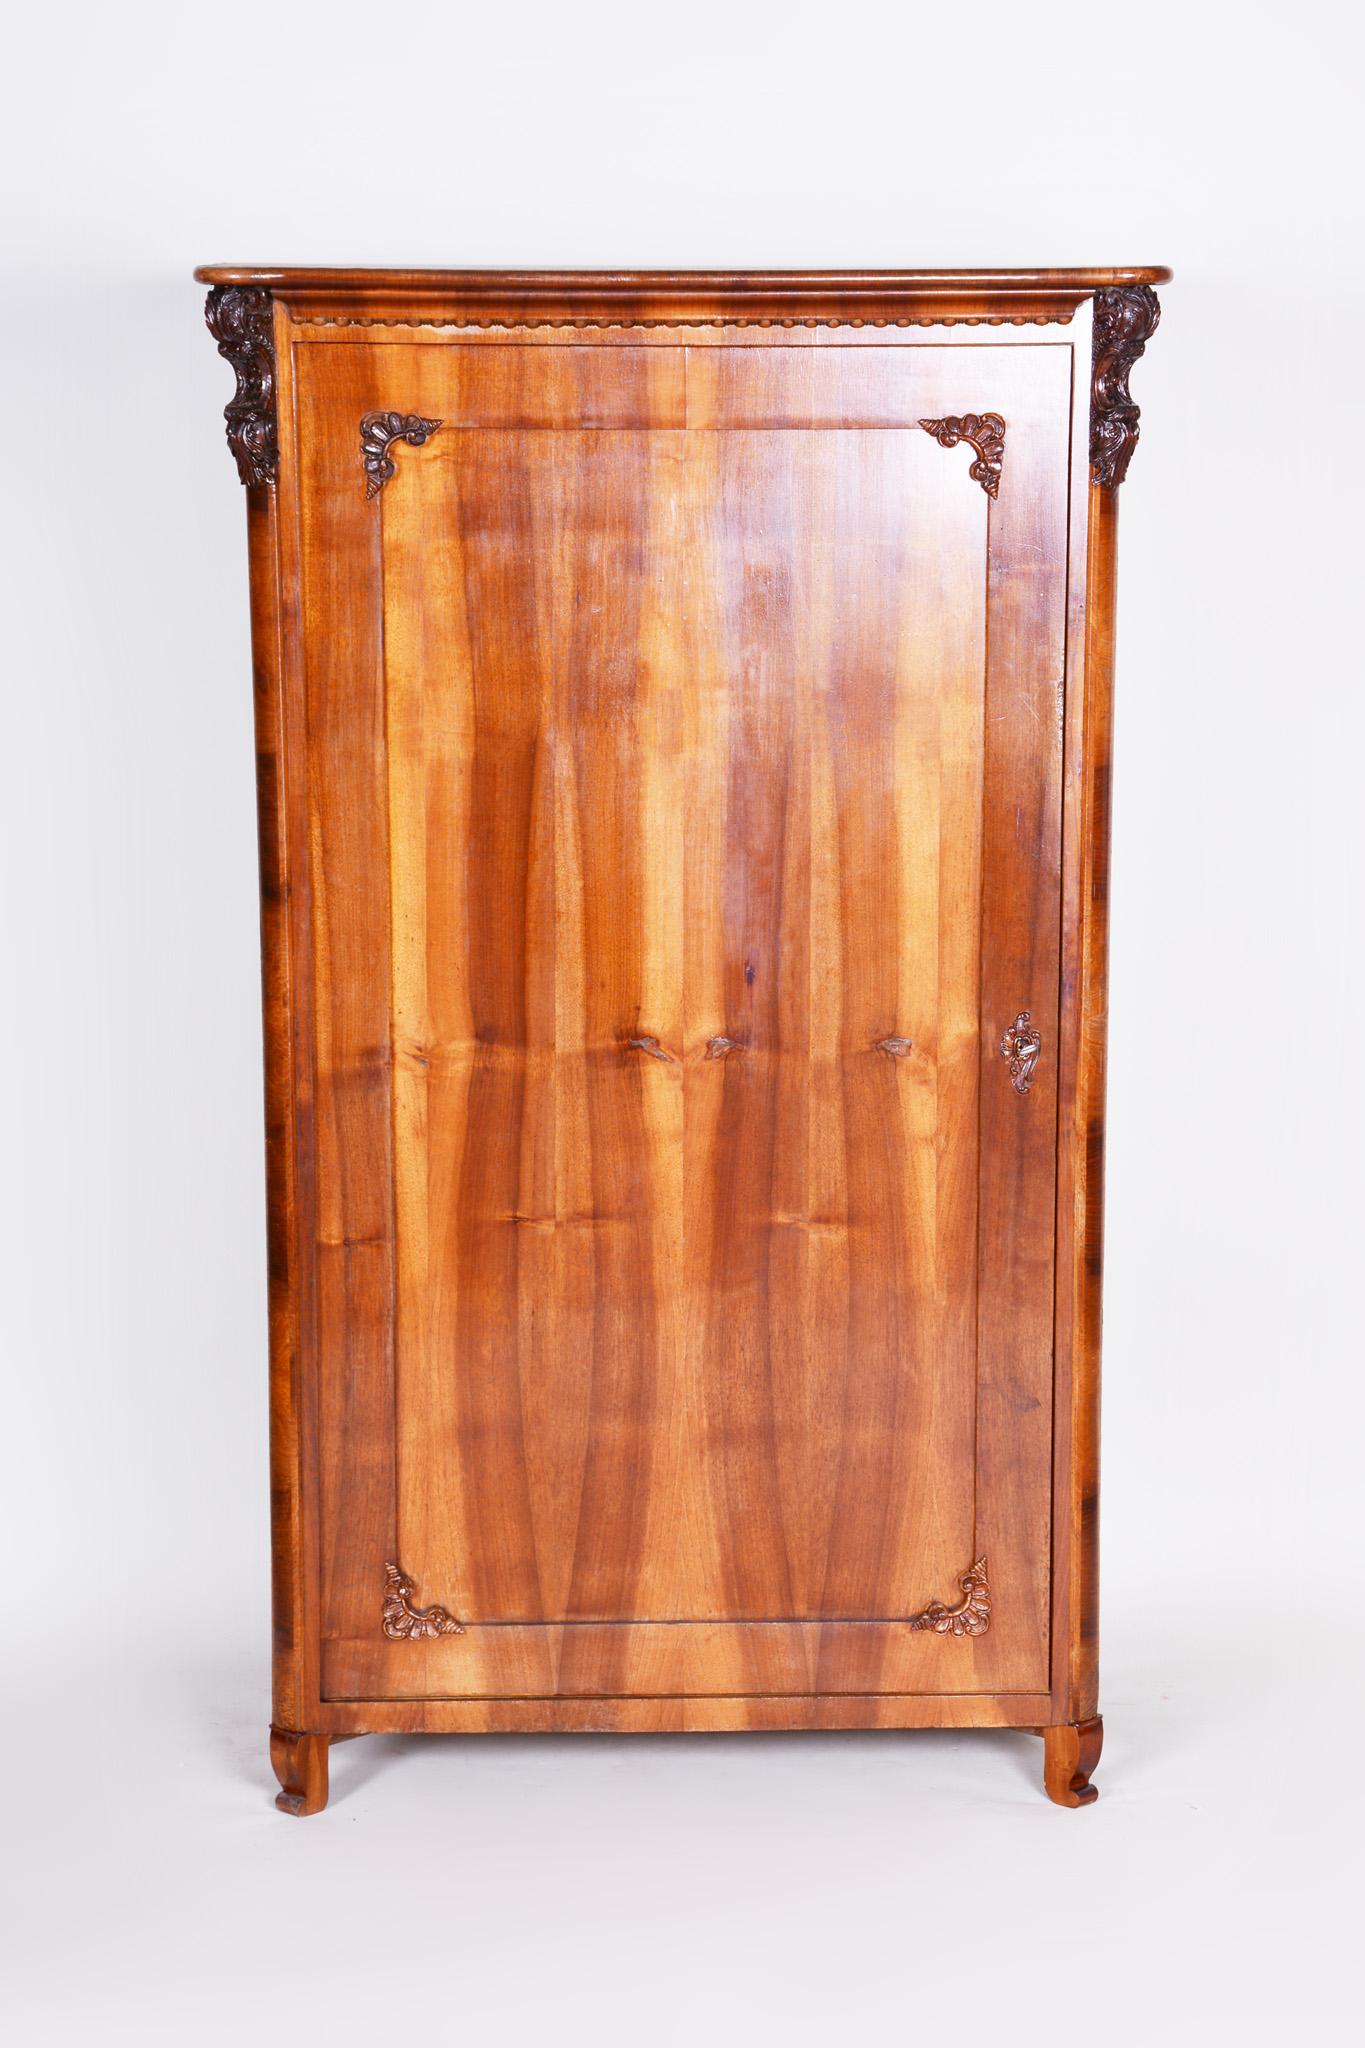 Shipping to any US port only for $290 USD

Completely restored Czech one door Biedermeier wardrobe cabinet.
Source: Bohemia (Czechia)
Period: 1840-1849
Material: Walnut.